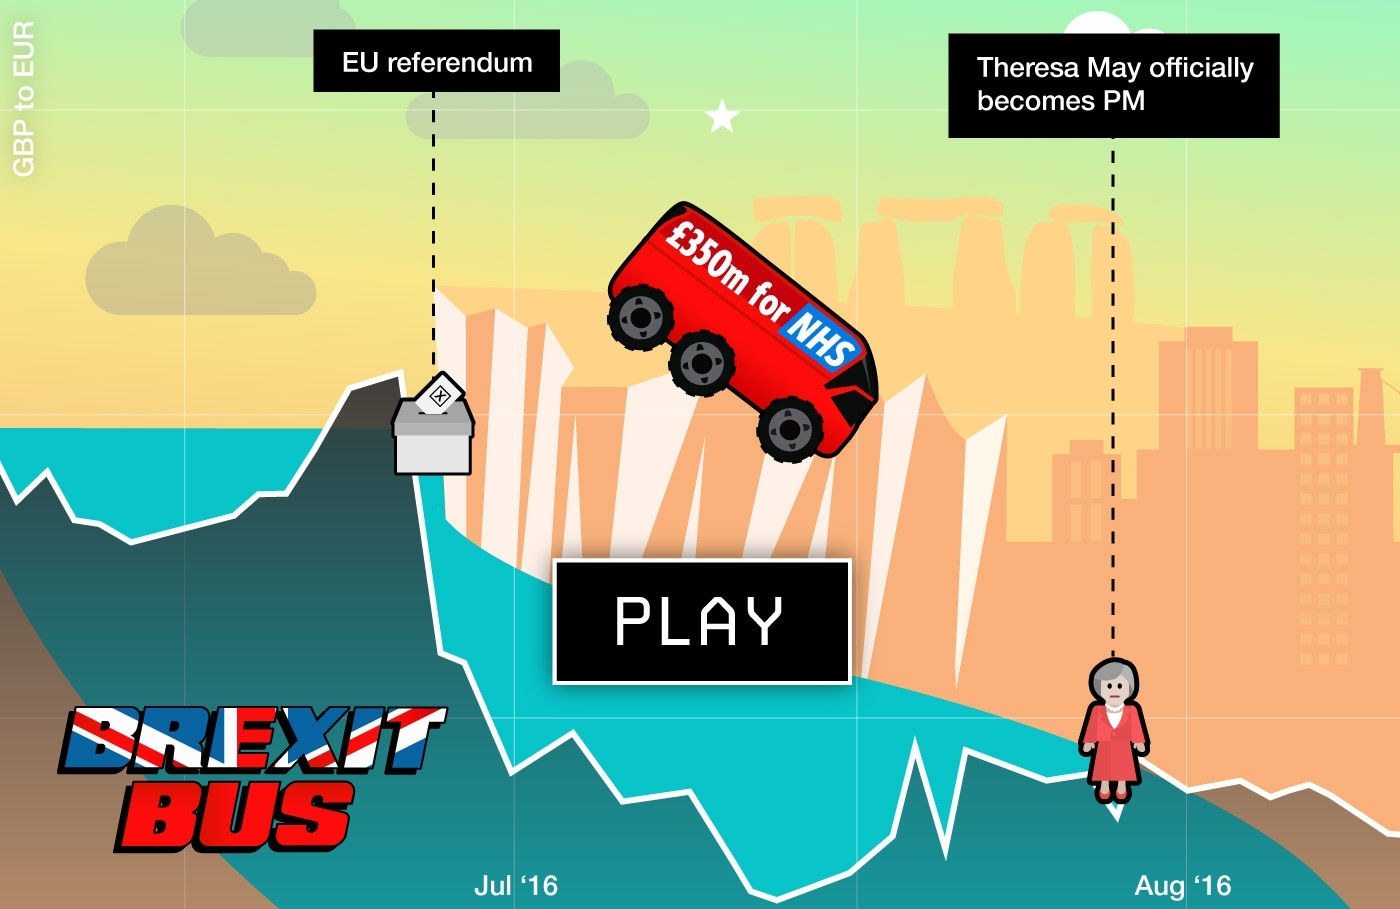 There's a Brexit bus game where you can steer it and hope it doesn't crash into oblivion